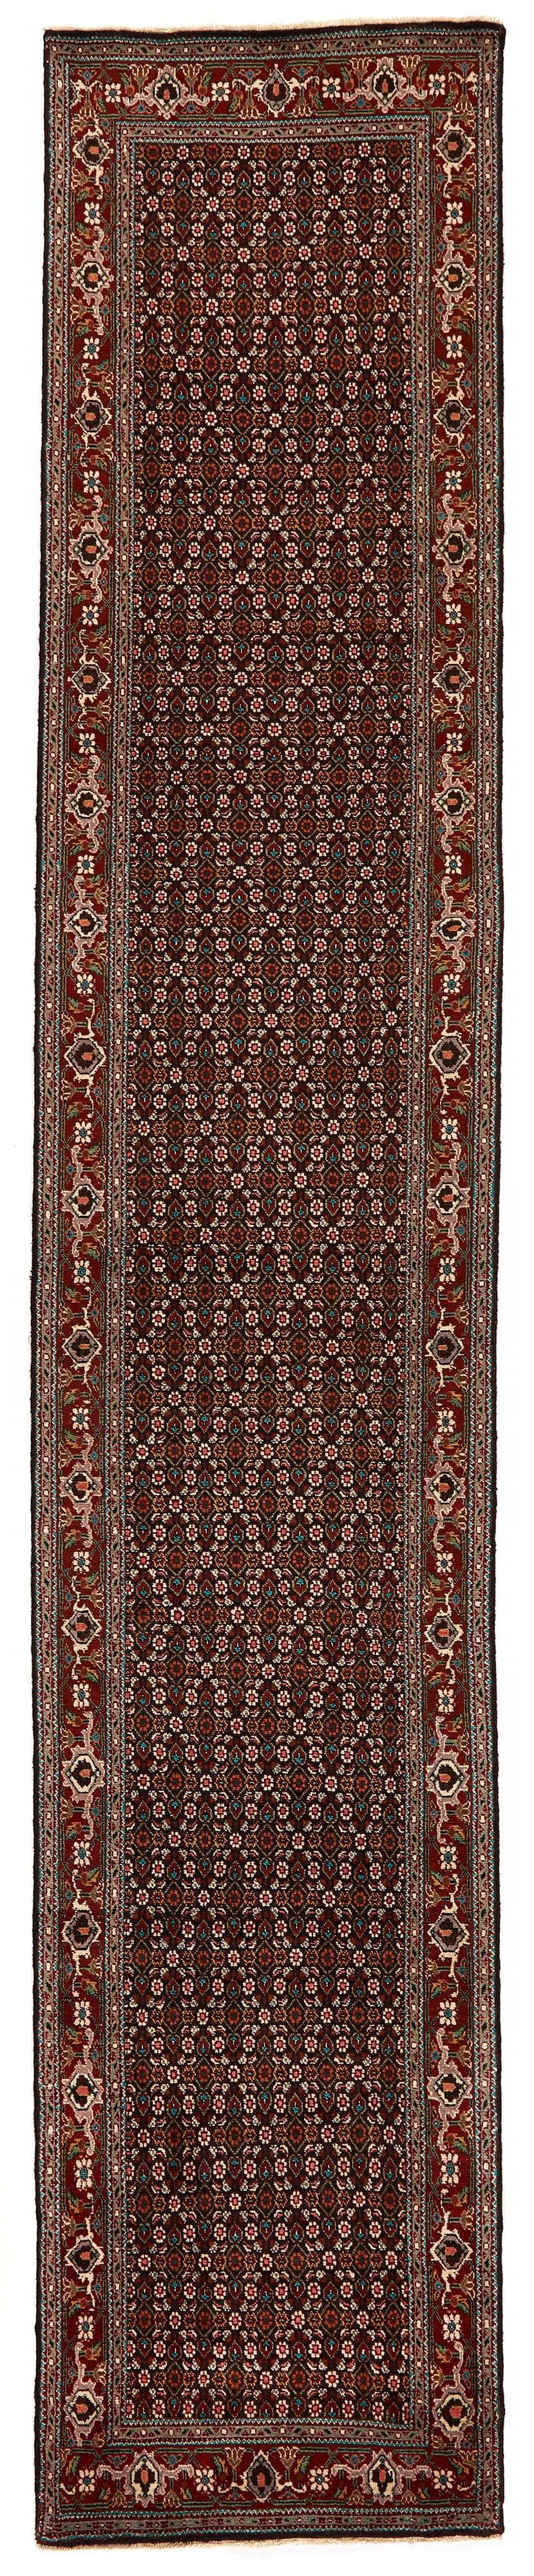 Authentic persian runner with traditional floral design in red, orange, green, ivory and black